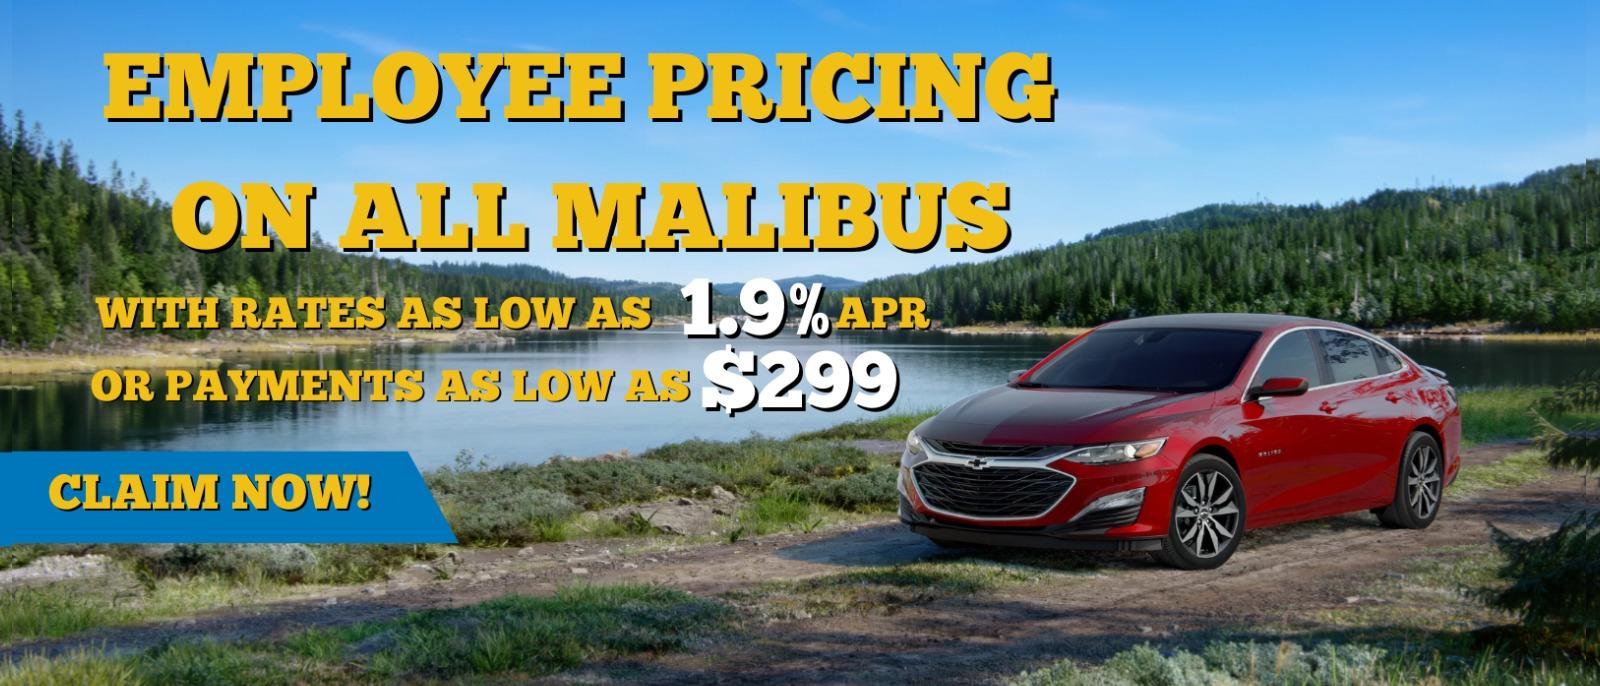 Employee pricing on allmalibus 
with rates as low as 1.9% apr or payments as low as $299